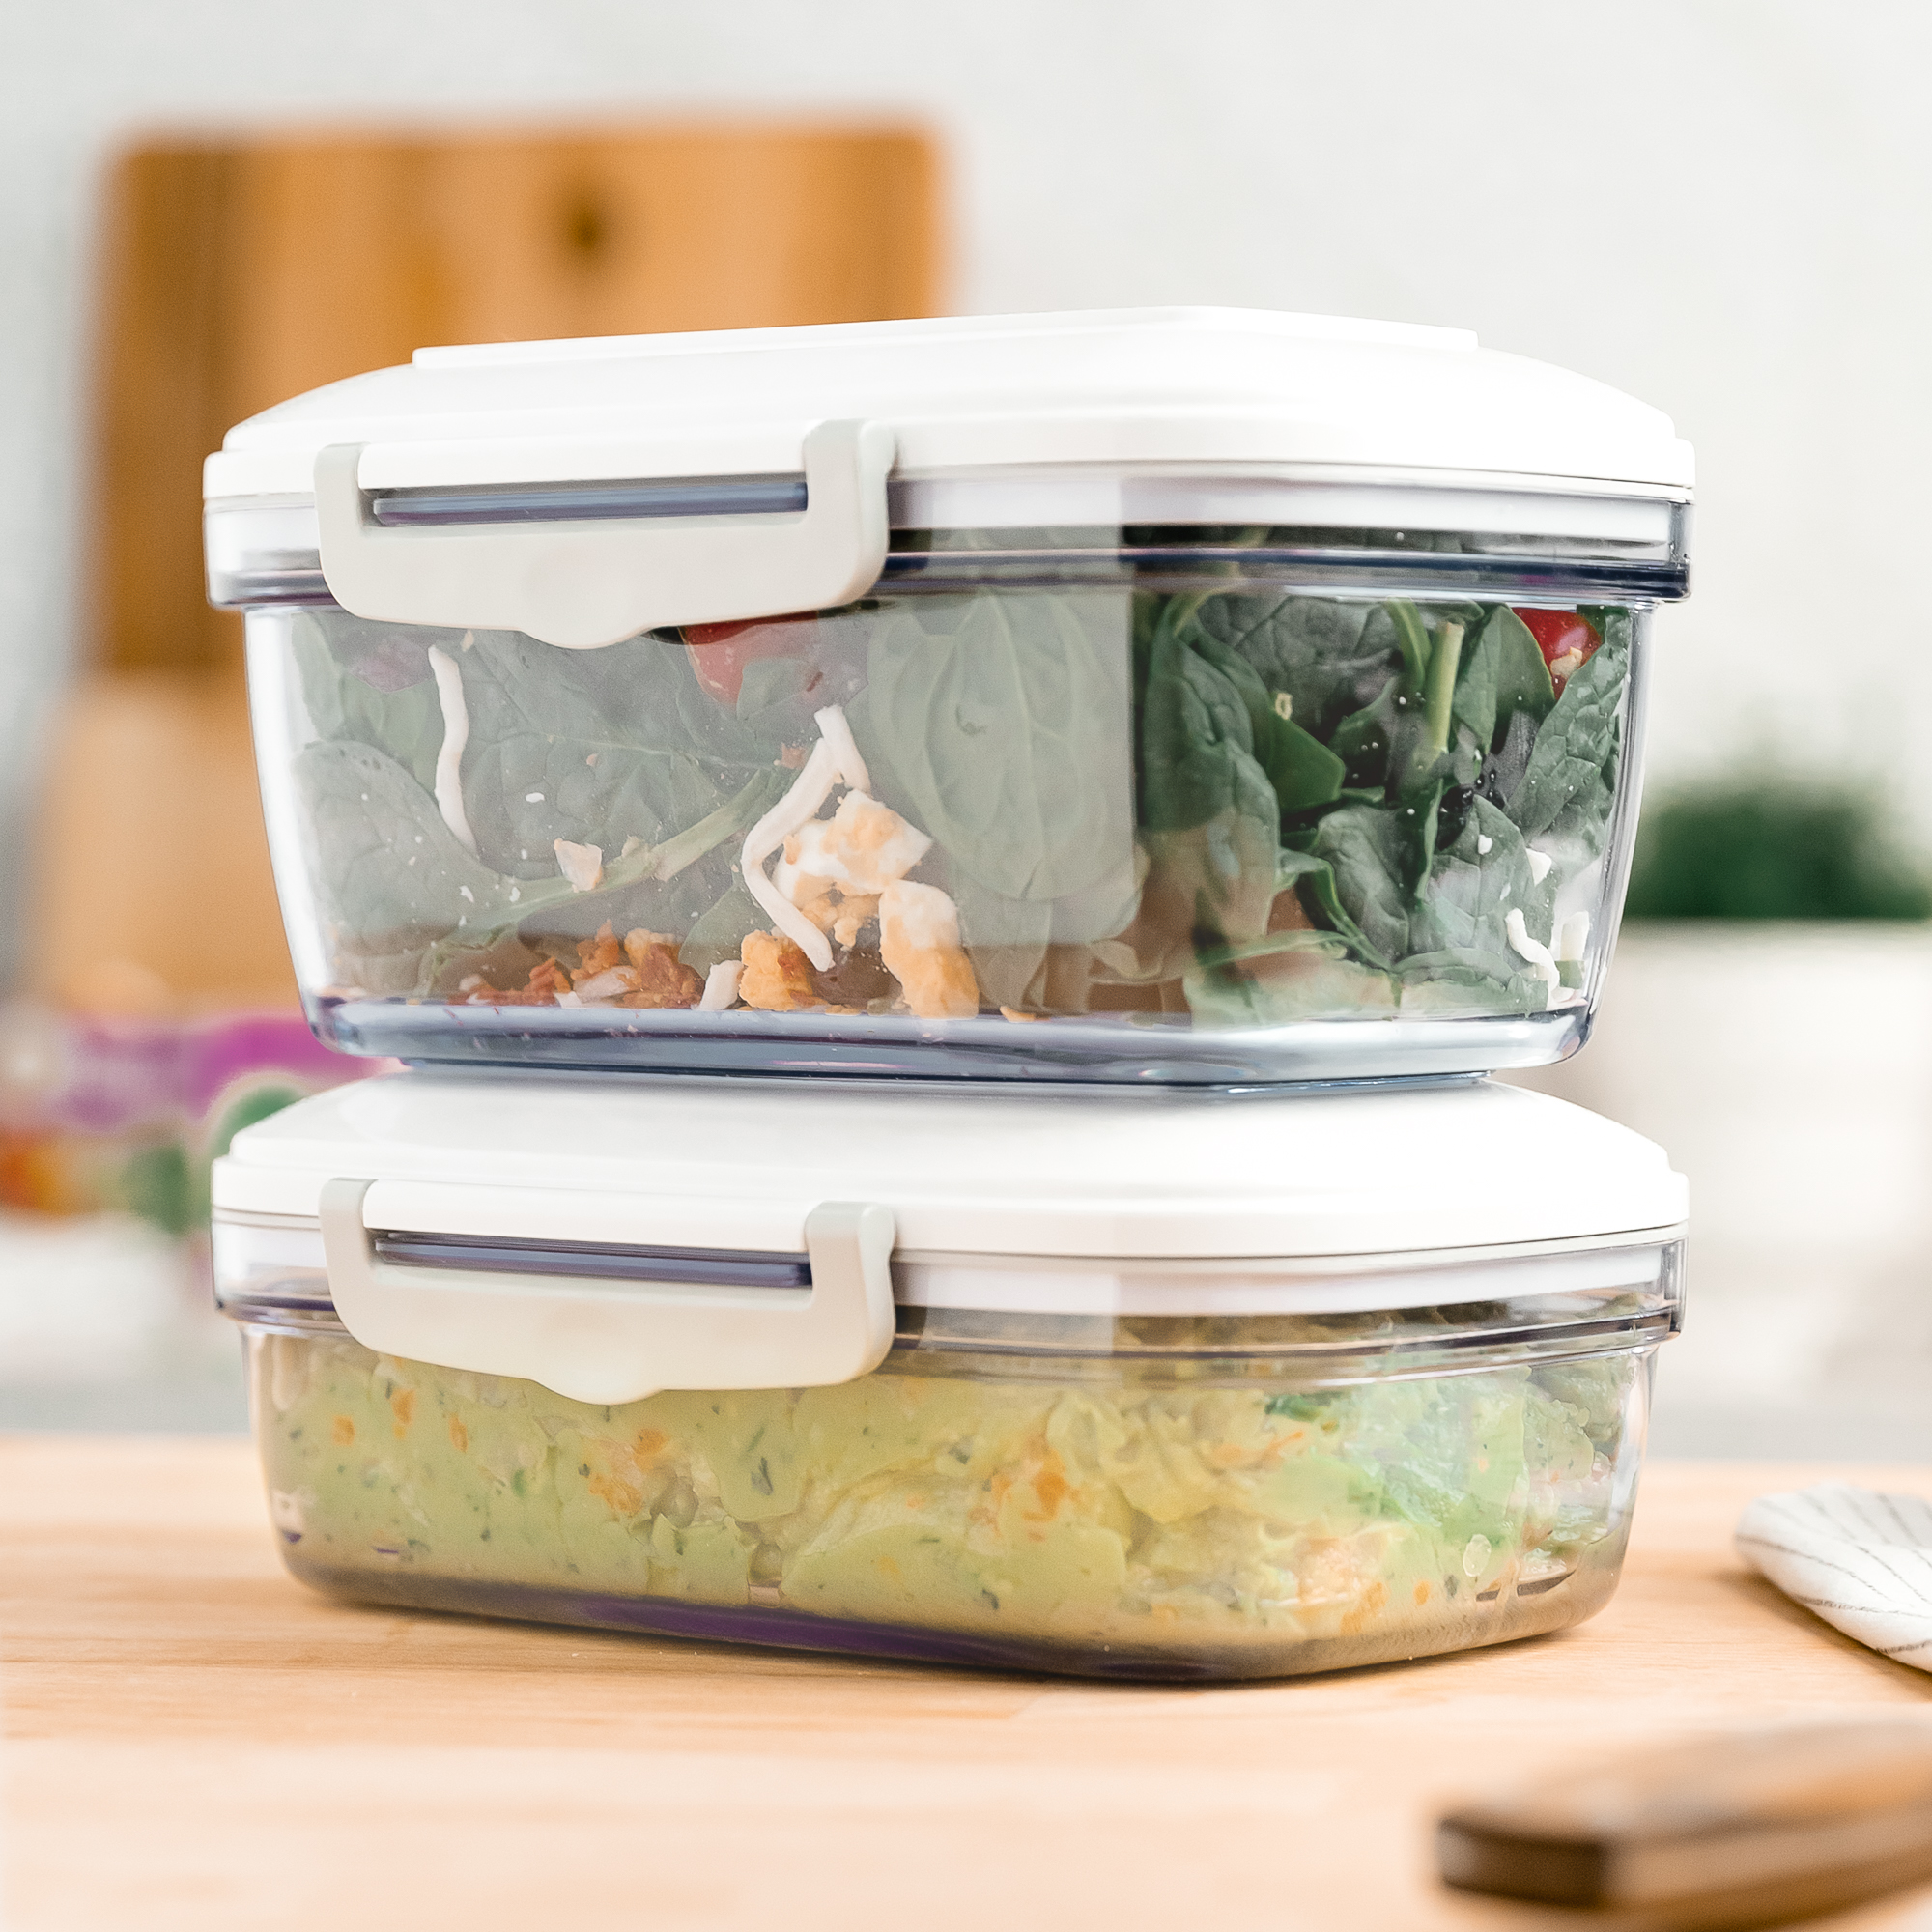 Spring Cleaning: Organize Your Kitchen, Pantry, Fridge and Freezer Using a  Magic Vac Vacuum Sealing System Brought to You by Avid Armor - Avid Armor